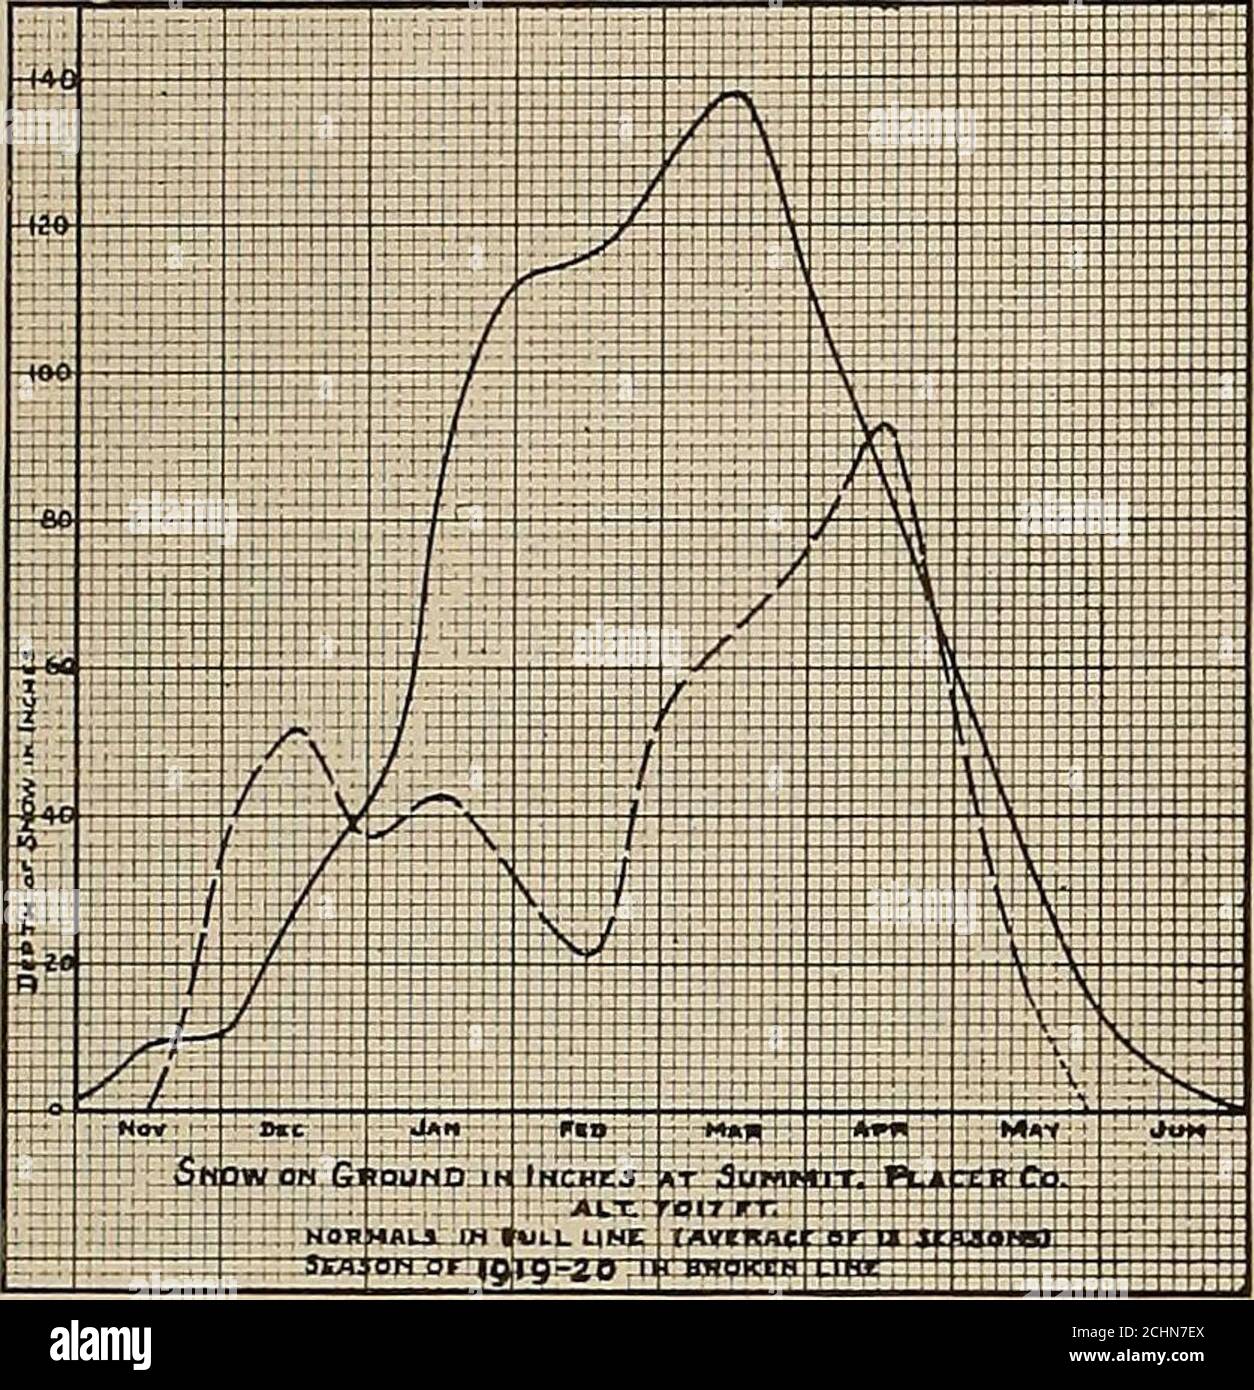 . Journal of electricity . 46 105 Normals—upper figures Season of 1919-20—lower figures Fordyce Dam Summit Tamarack Date Nevada Co. Placer Co. Alpine Co. Alt. 6500 Ft. Alt. 7017 Ft. Alt. 8000 Ft. November 1 1 1 1 0 0 0 November 15 8 9 11 0 0 0 December 1 9 10 17 18 34 36 December 15 28 28 38 50 52 48 January 1 38 41 57 34 37 28 January 15 71 87 101 33 43 28 February 1 83 112 139 34 32 21 February 15 92 116 149 30 21 27 March 1 112 128 173 54 53 60 March 15 109 138 177 58 65 56 AprU 1 103 114 167 67 76 86 April 16 87 87 135 74 93 90 May I 63 60 115 50 55 72 May 15 60 3416 95 May 31 29 14 65 26 Stock Photo